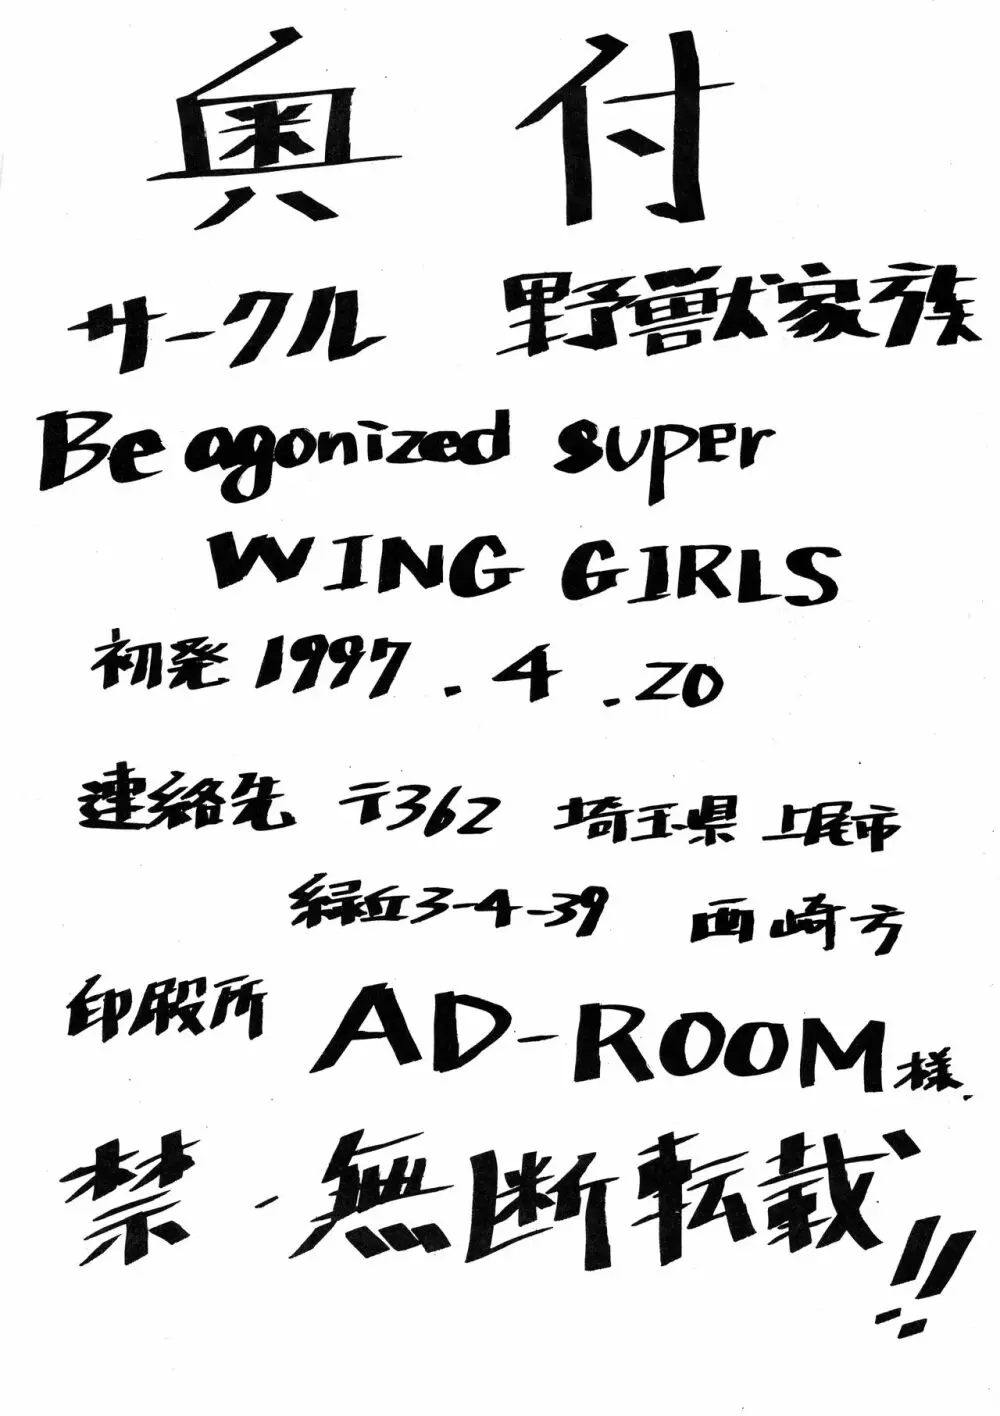 Be agonized super WING GIRLS 42ページ